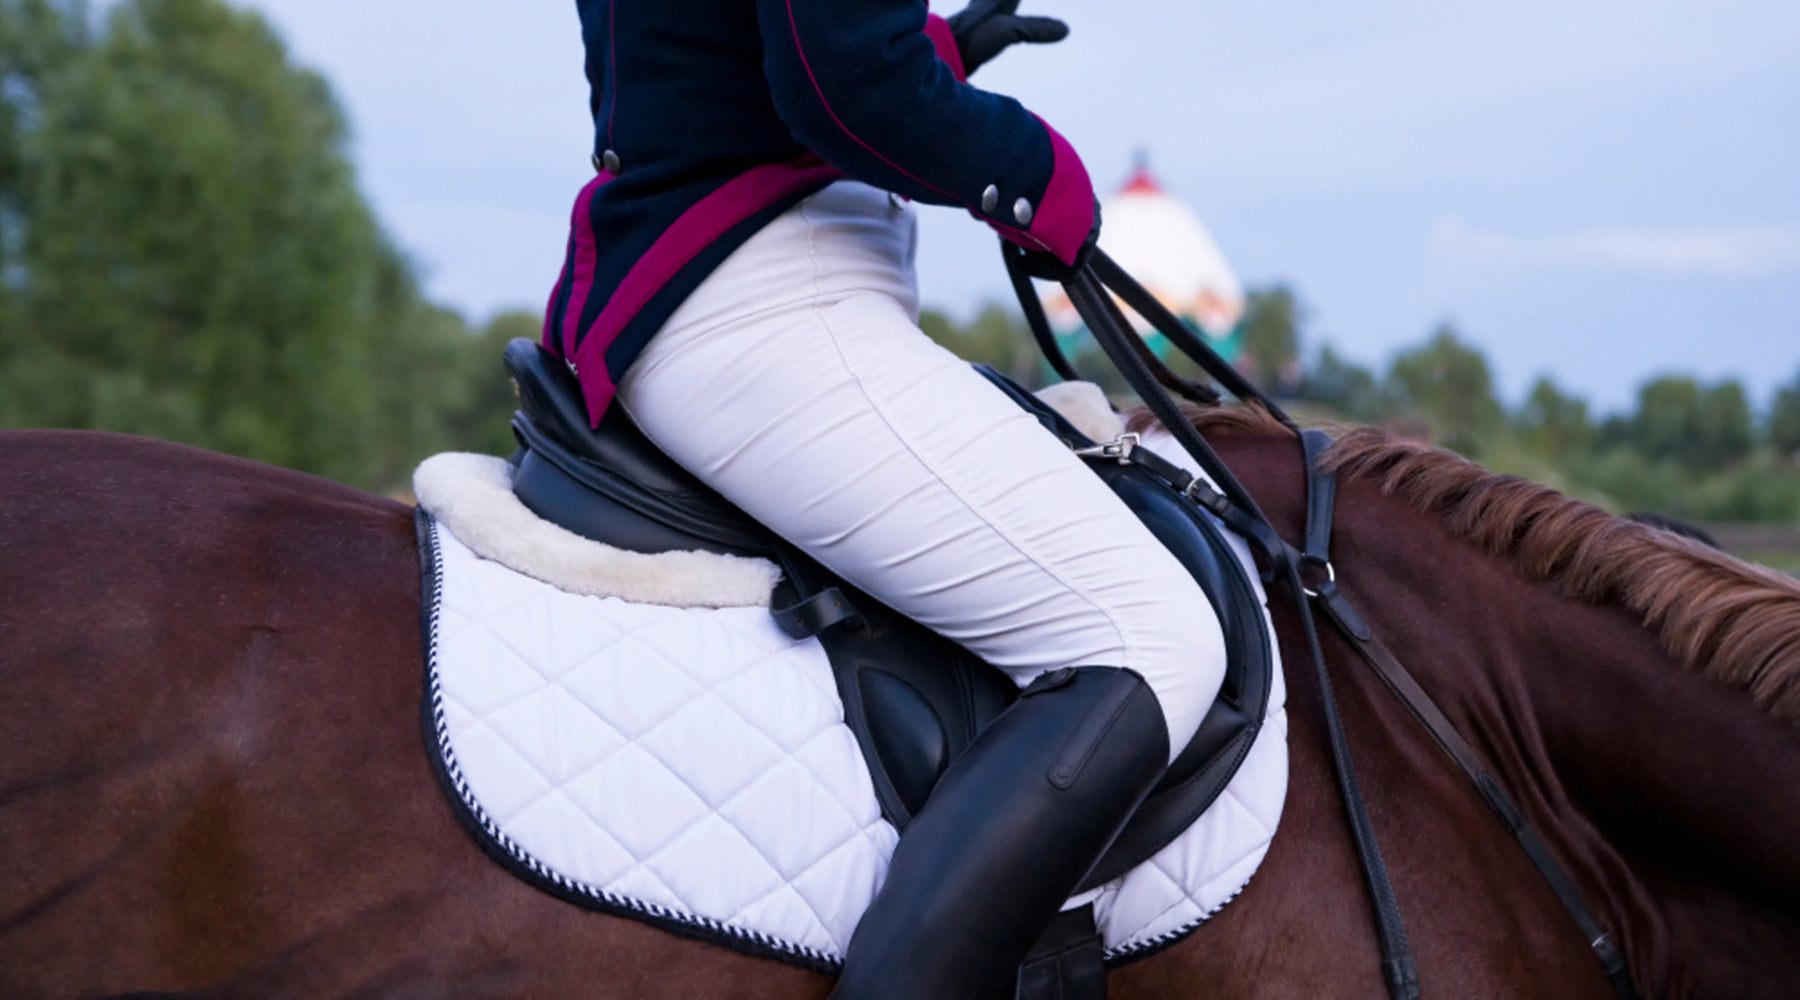 Jodhpurs Vs. Breeches, What's the Difference?